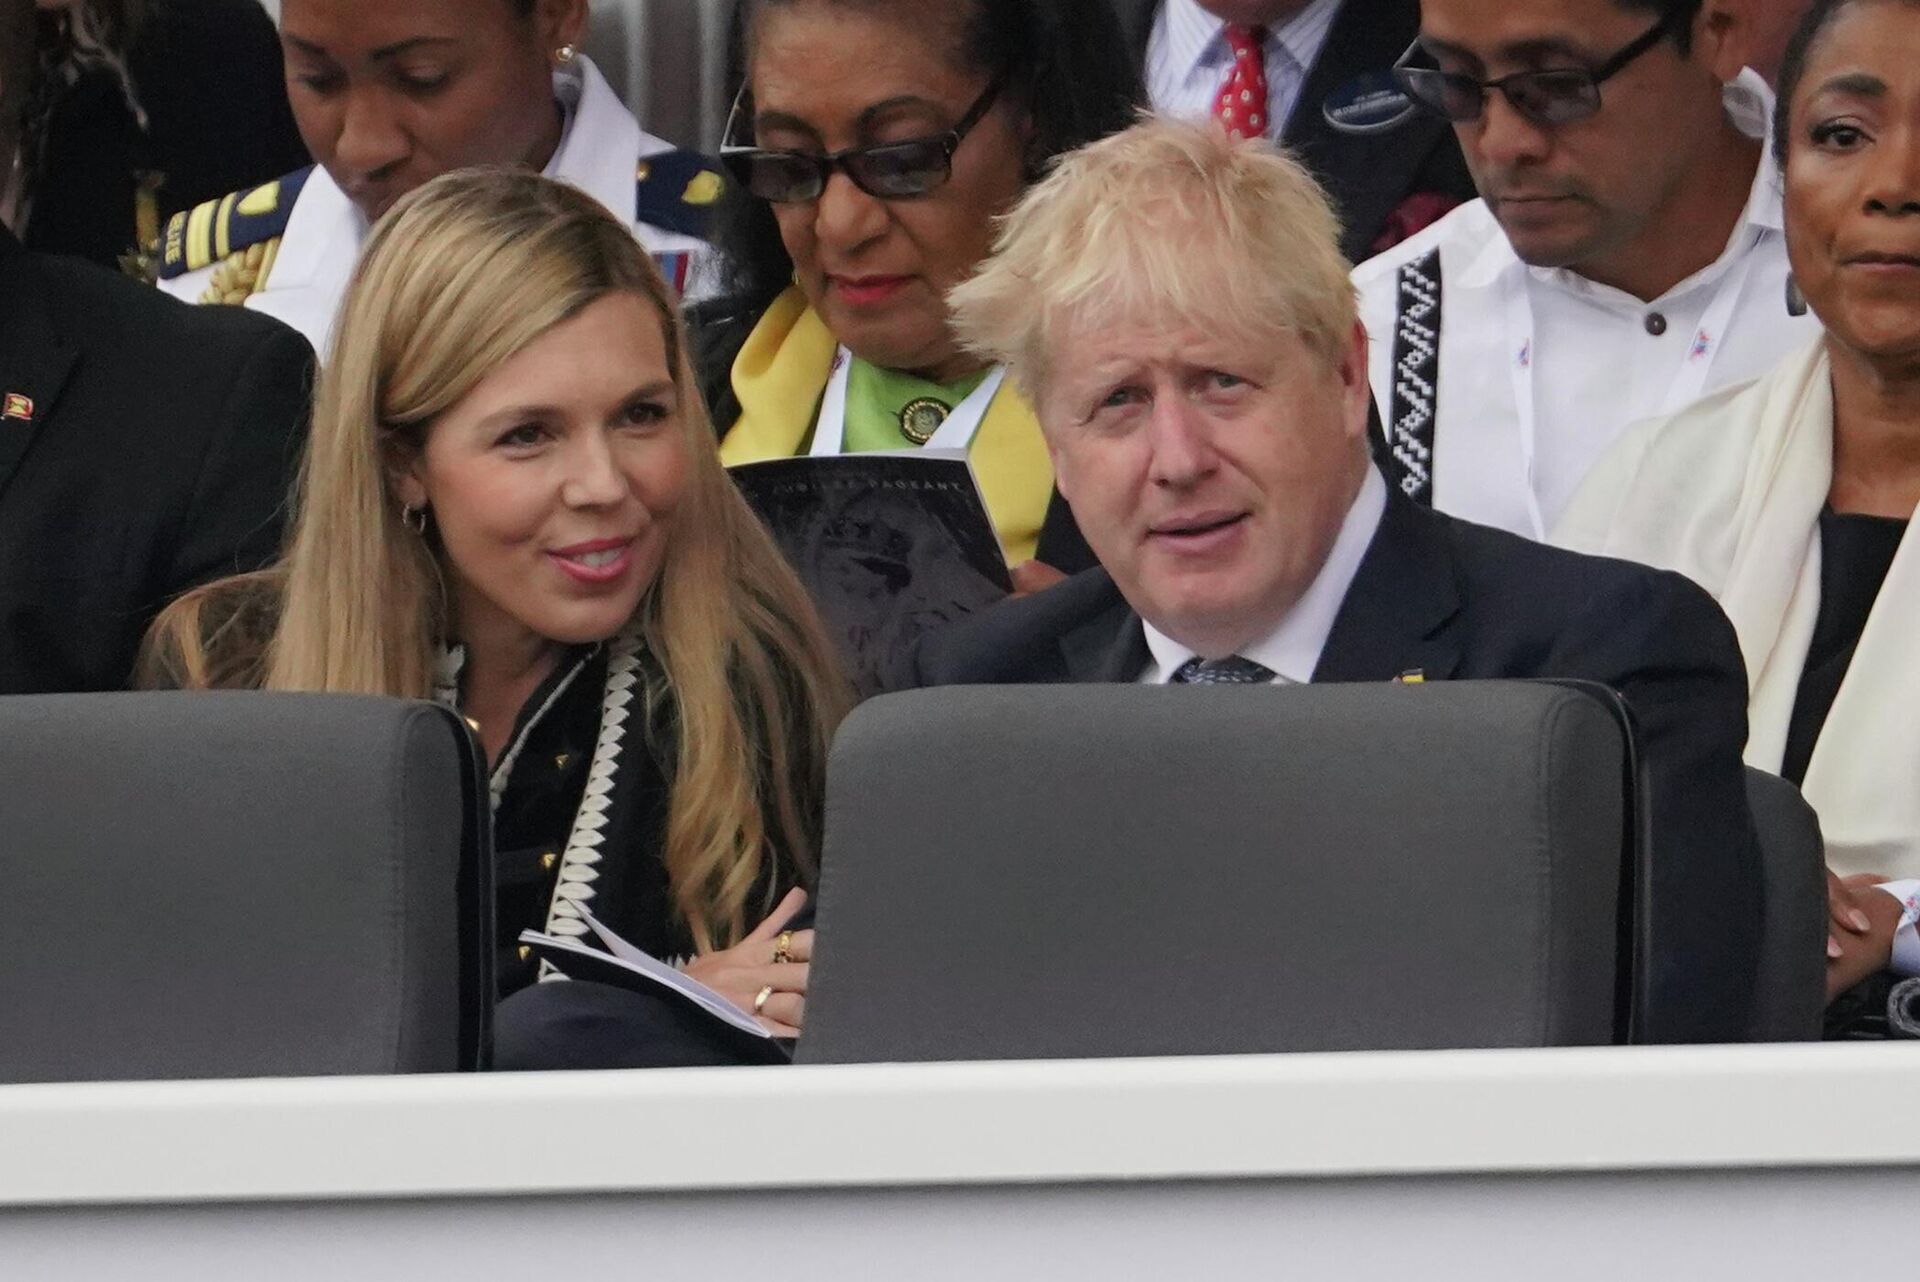 Britain's Prime Minister Boris Johnson and his wife Carrie Johnson during the Platinum Jubilee Pageant outside Buckingham Palace - Sputnik International, 1920, 05.09.2022